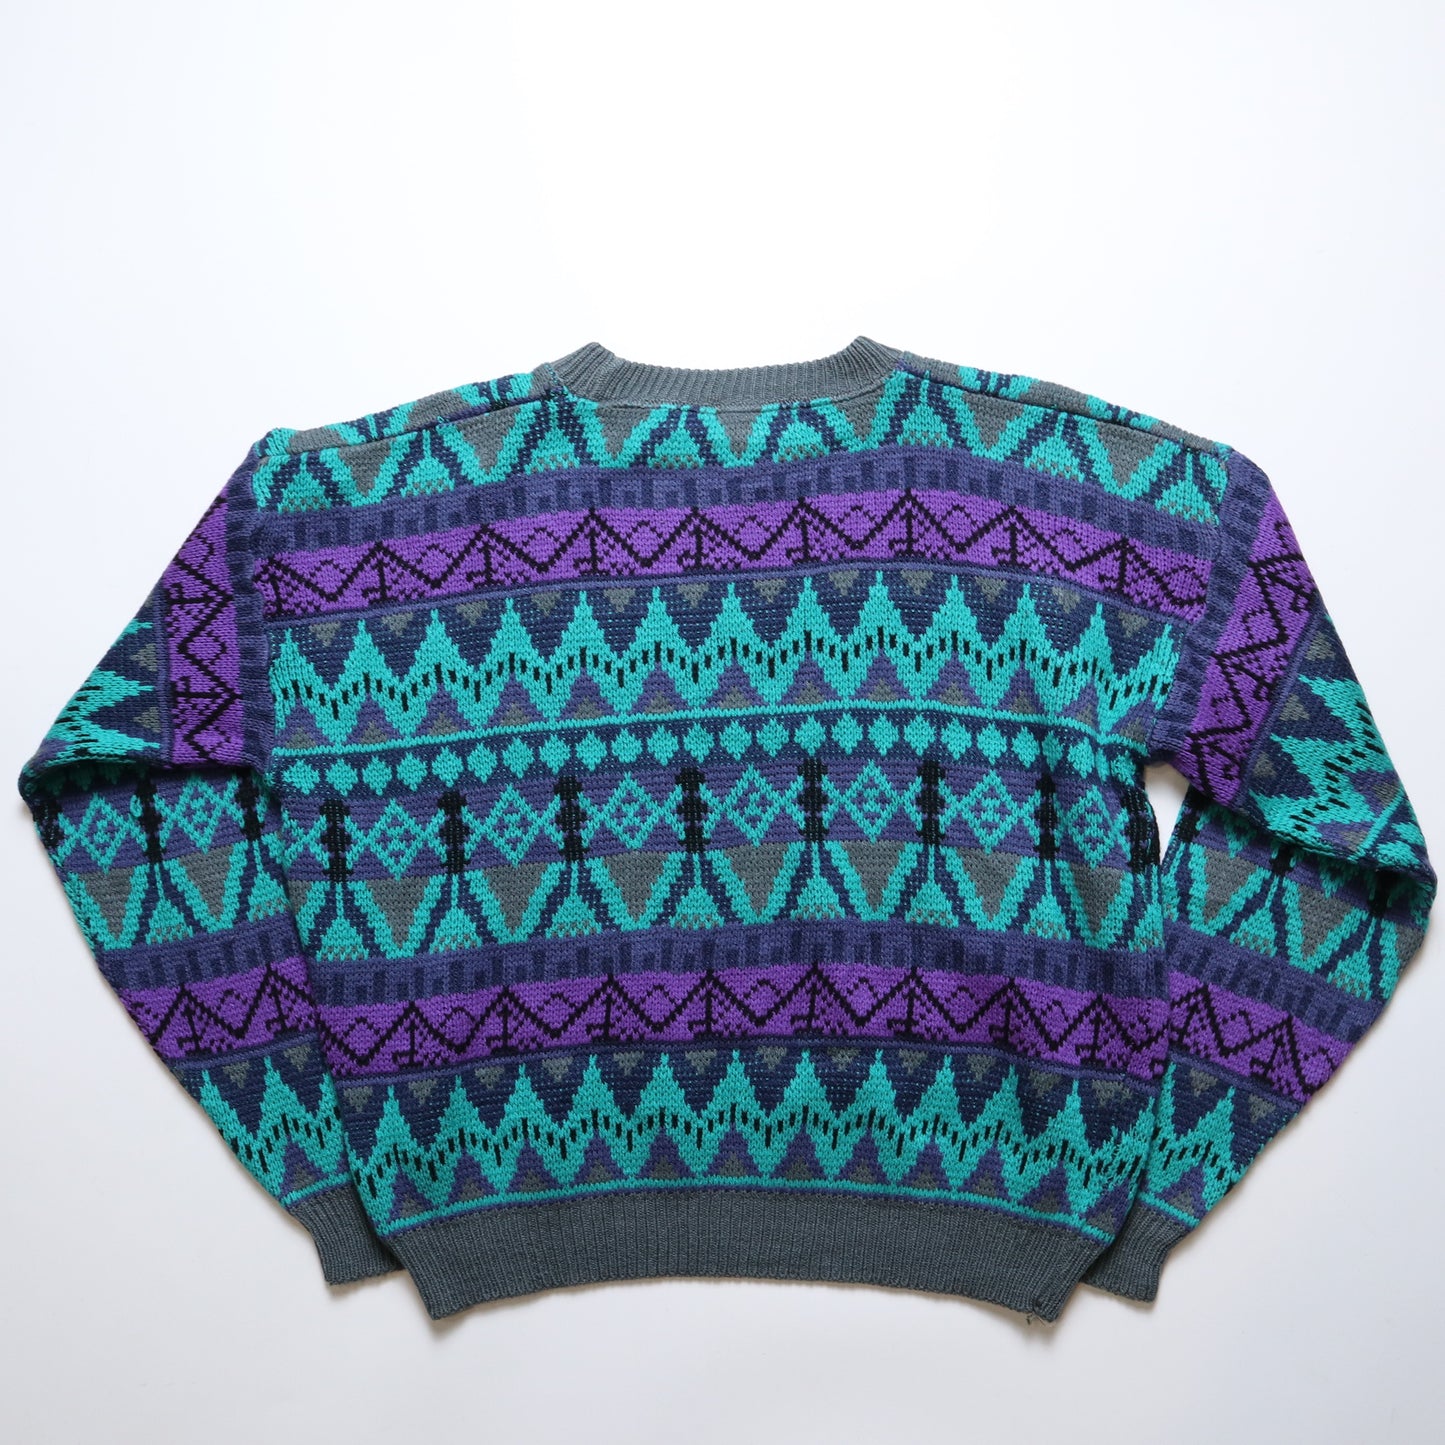 90s USA-made green and purple geometric graphic short sweater